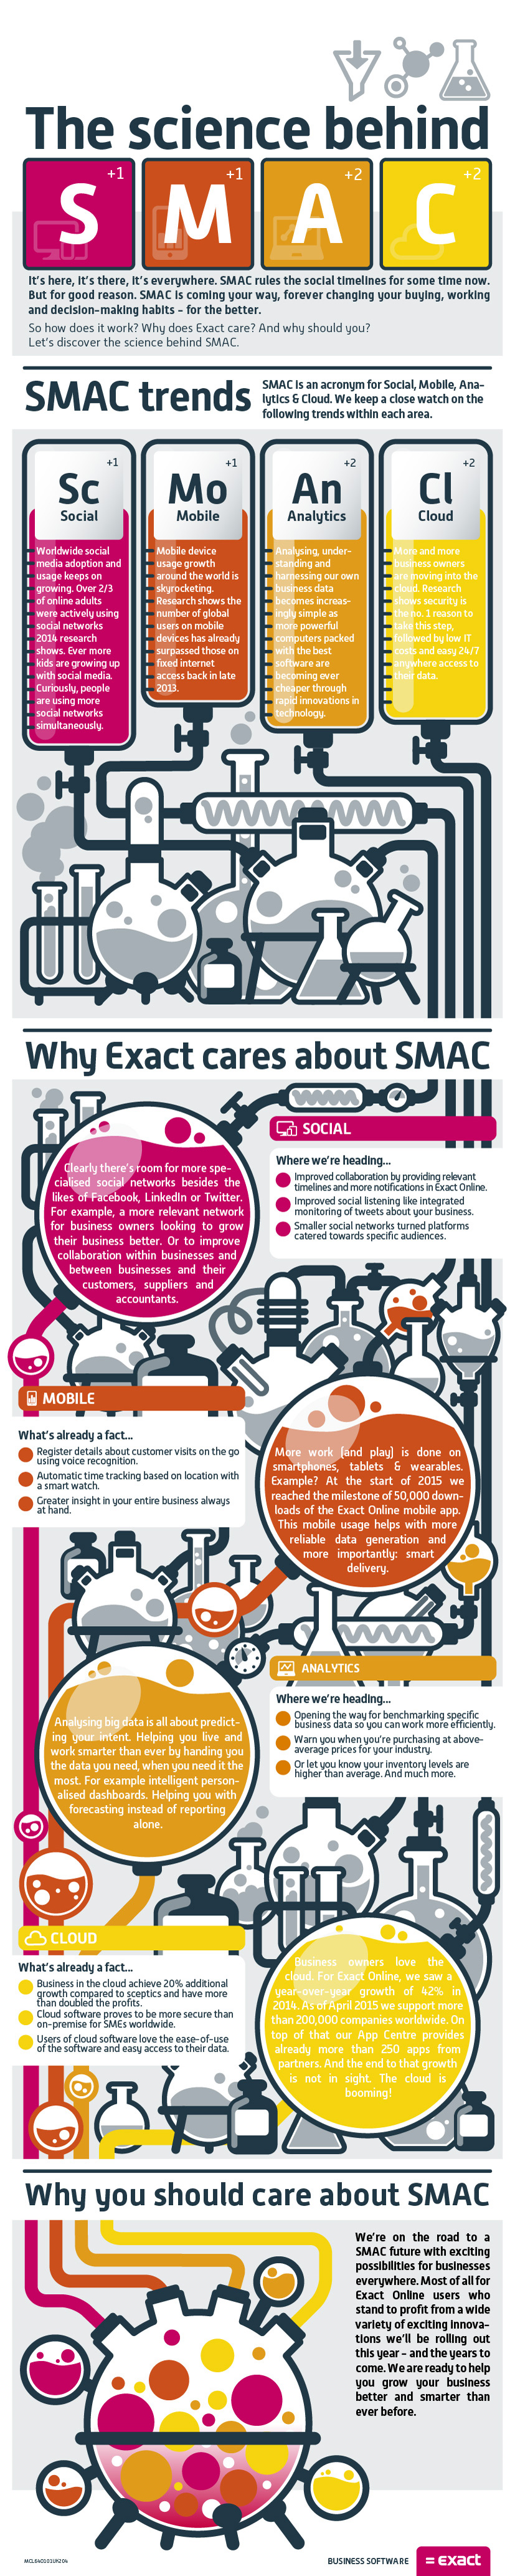 infographic SMAC Social Mobile Analytics Cloud